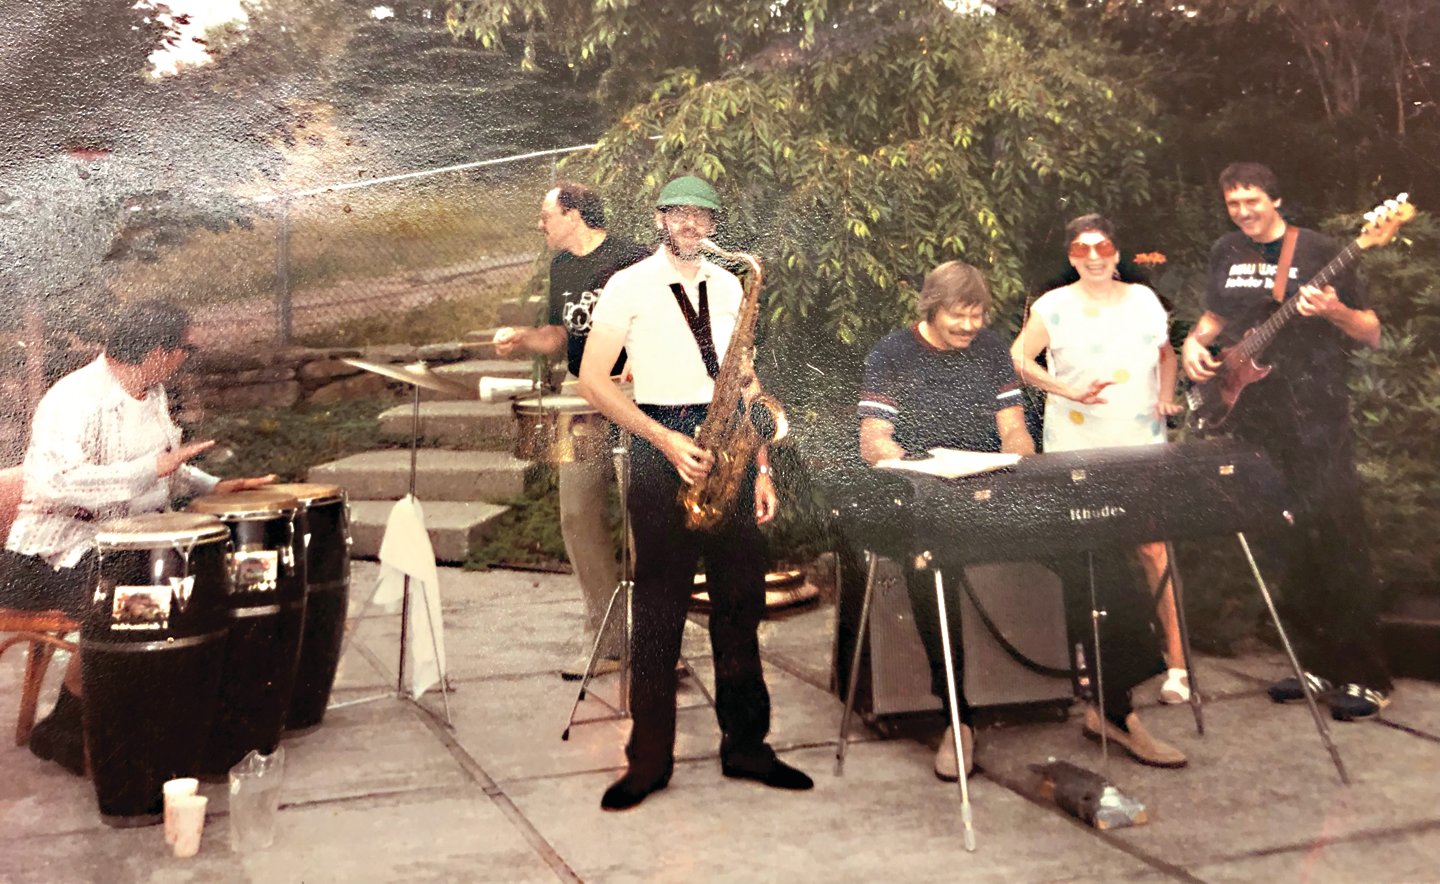 In August of 1984, Lentz was performing on the piano with the Jay Ross Band at Kutsher’s Country Club.